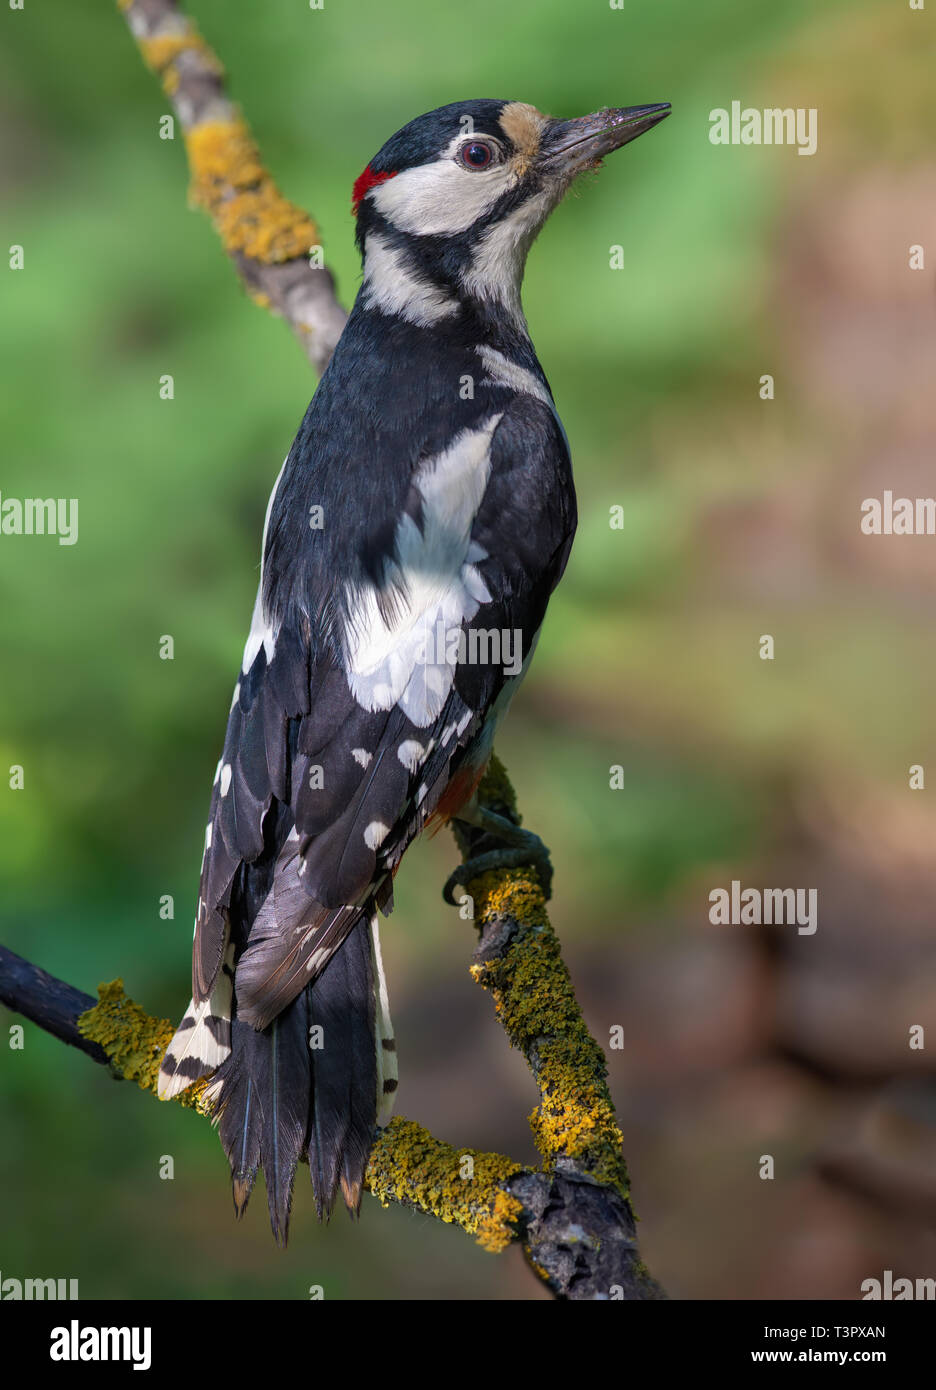 Male Great Spotted Woodpecker perched on a small lichen branch in very high definition Stock Photo